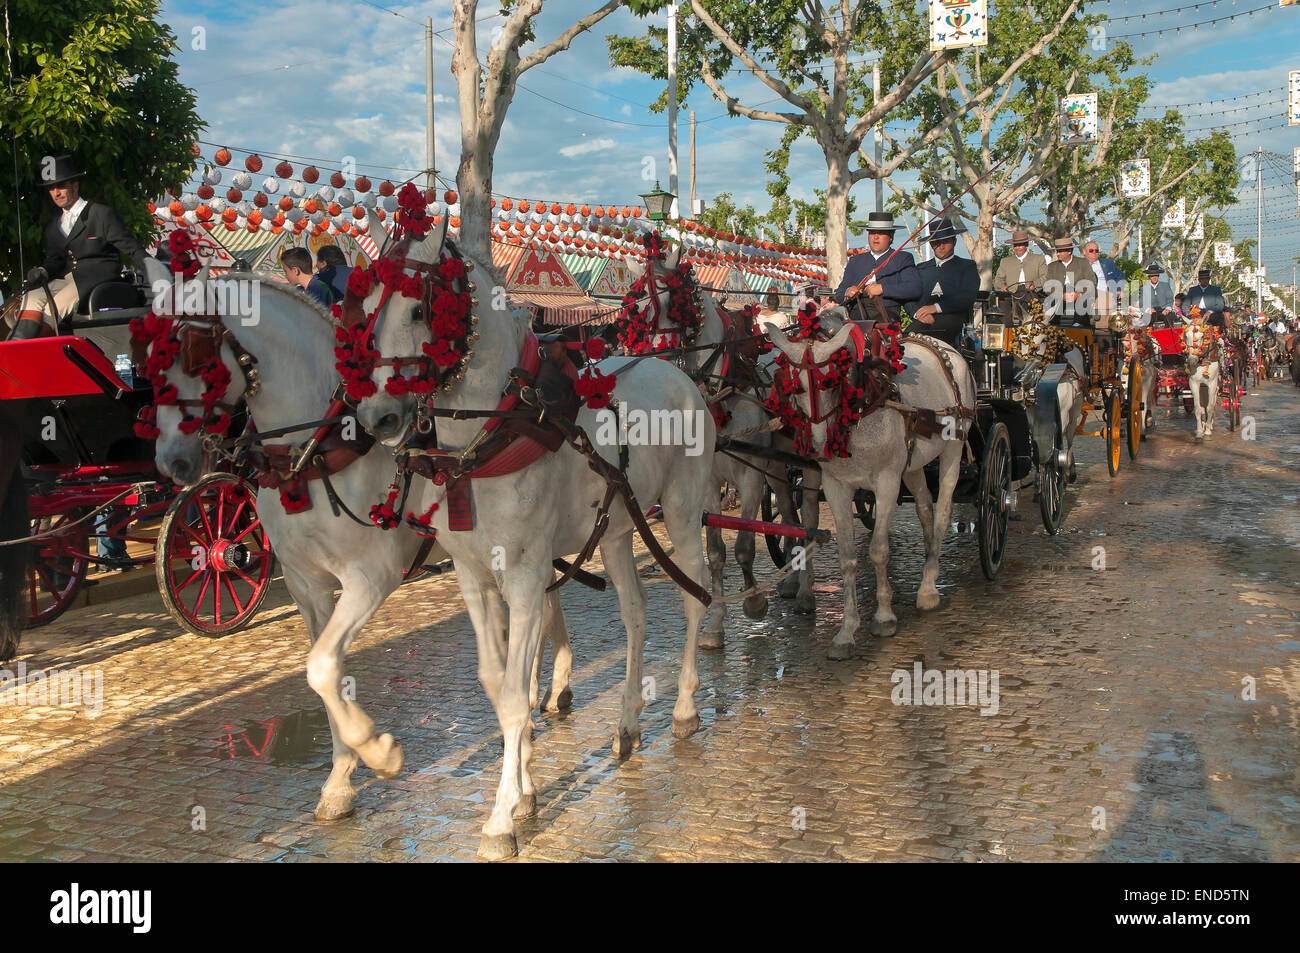 April Fair, Horse carriages, Seville, Region of Andalusia, Spain, Europe Stock Photo